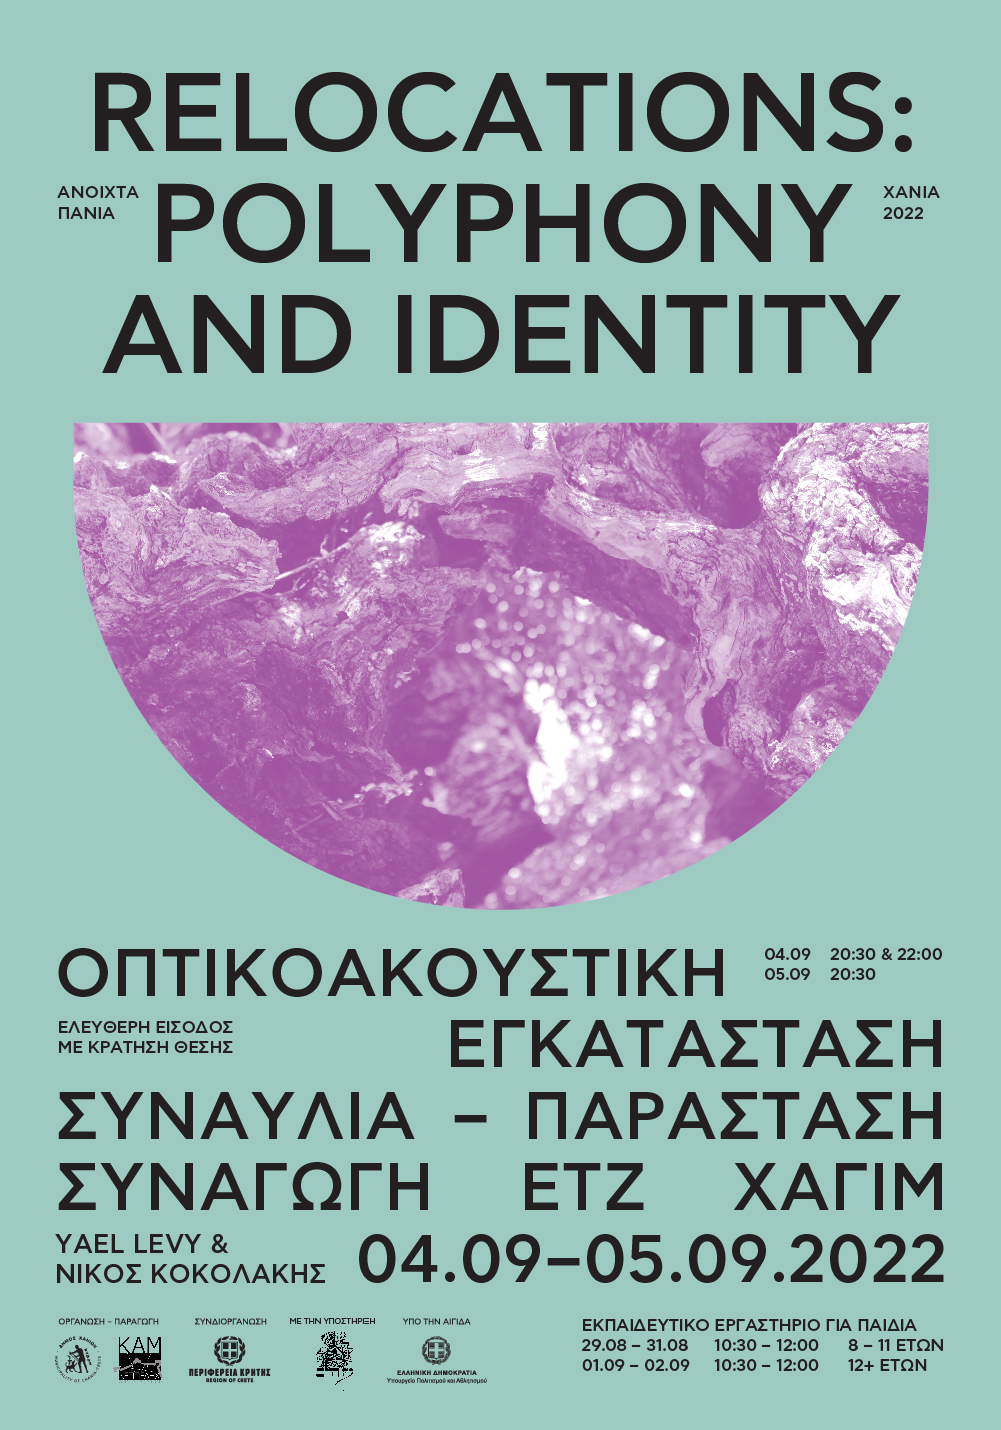 RELOCATIONS: POLYPHONY AND IDENTITY